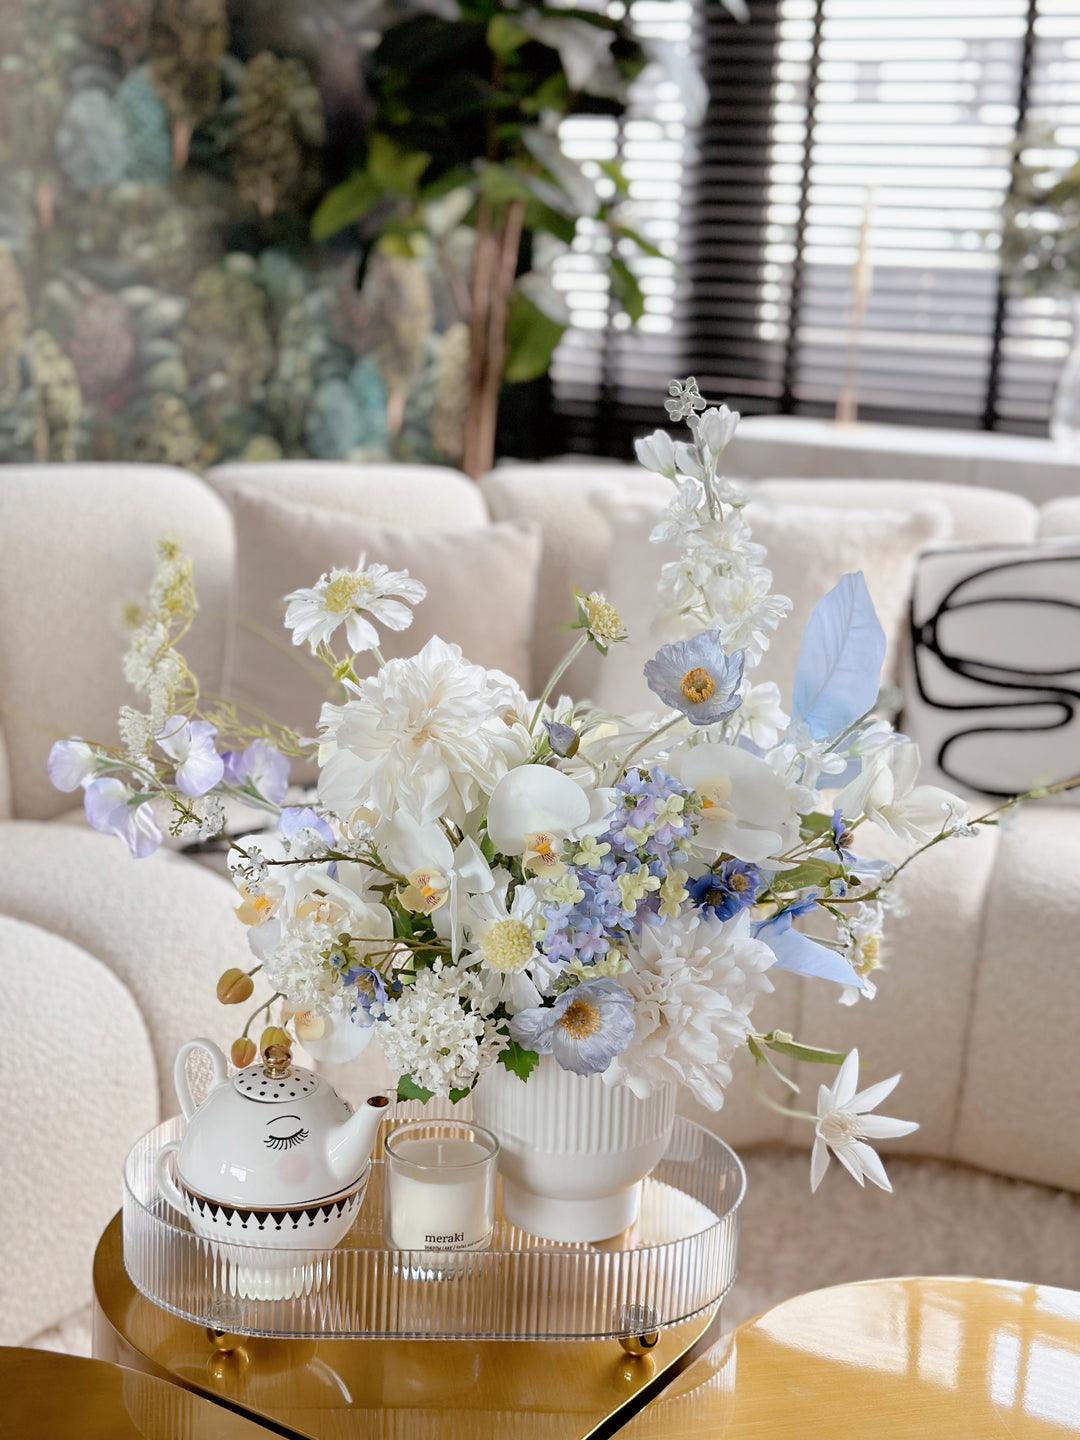 4 Reasons to Gift a Faux Flower Arrangement